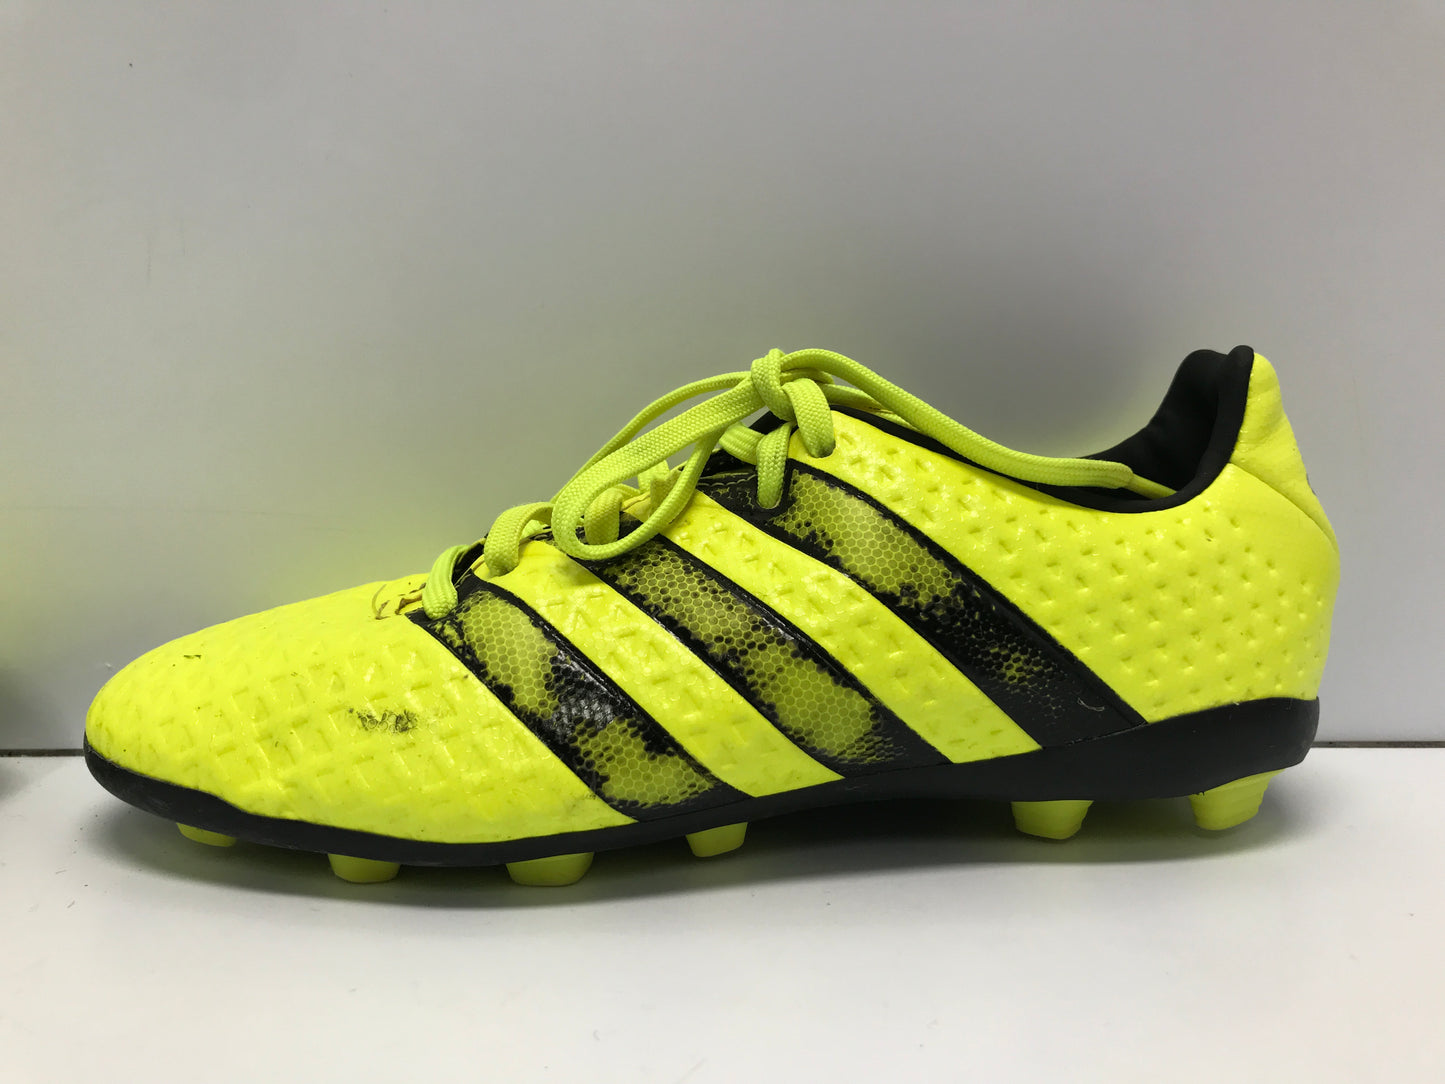 Soccer Shoes Cleats Child Size 2 Adidas Yellow Black